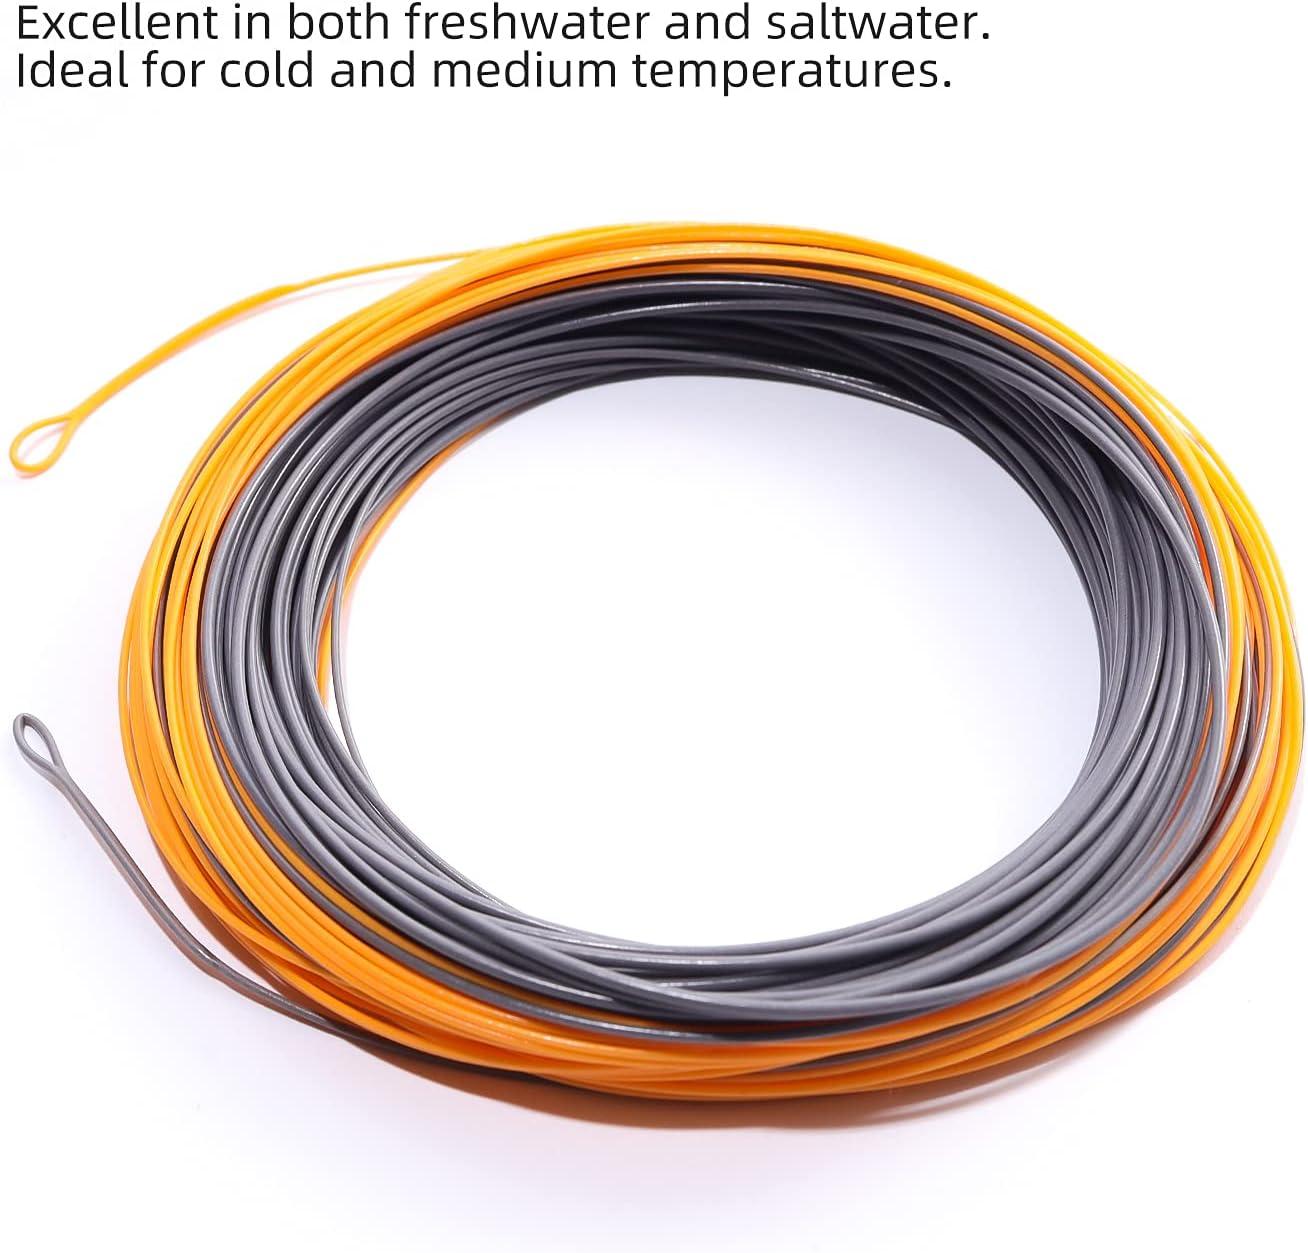  ANGLER DREAM Gold Fly Line 90FT Weight Forward Floating 2WT Fly  Fishing Line : Sports & Outdoors